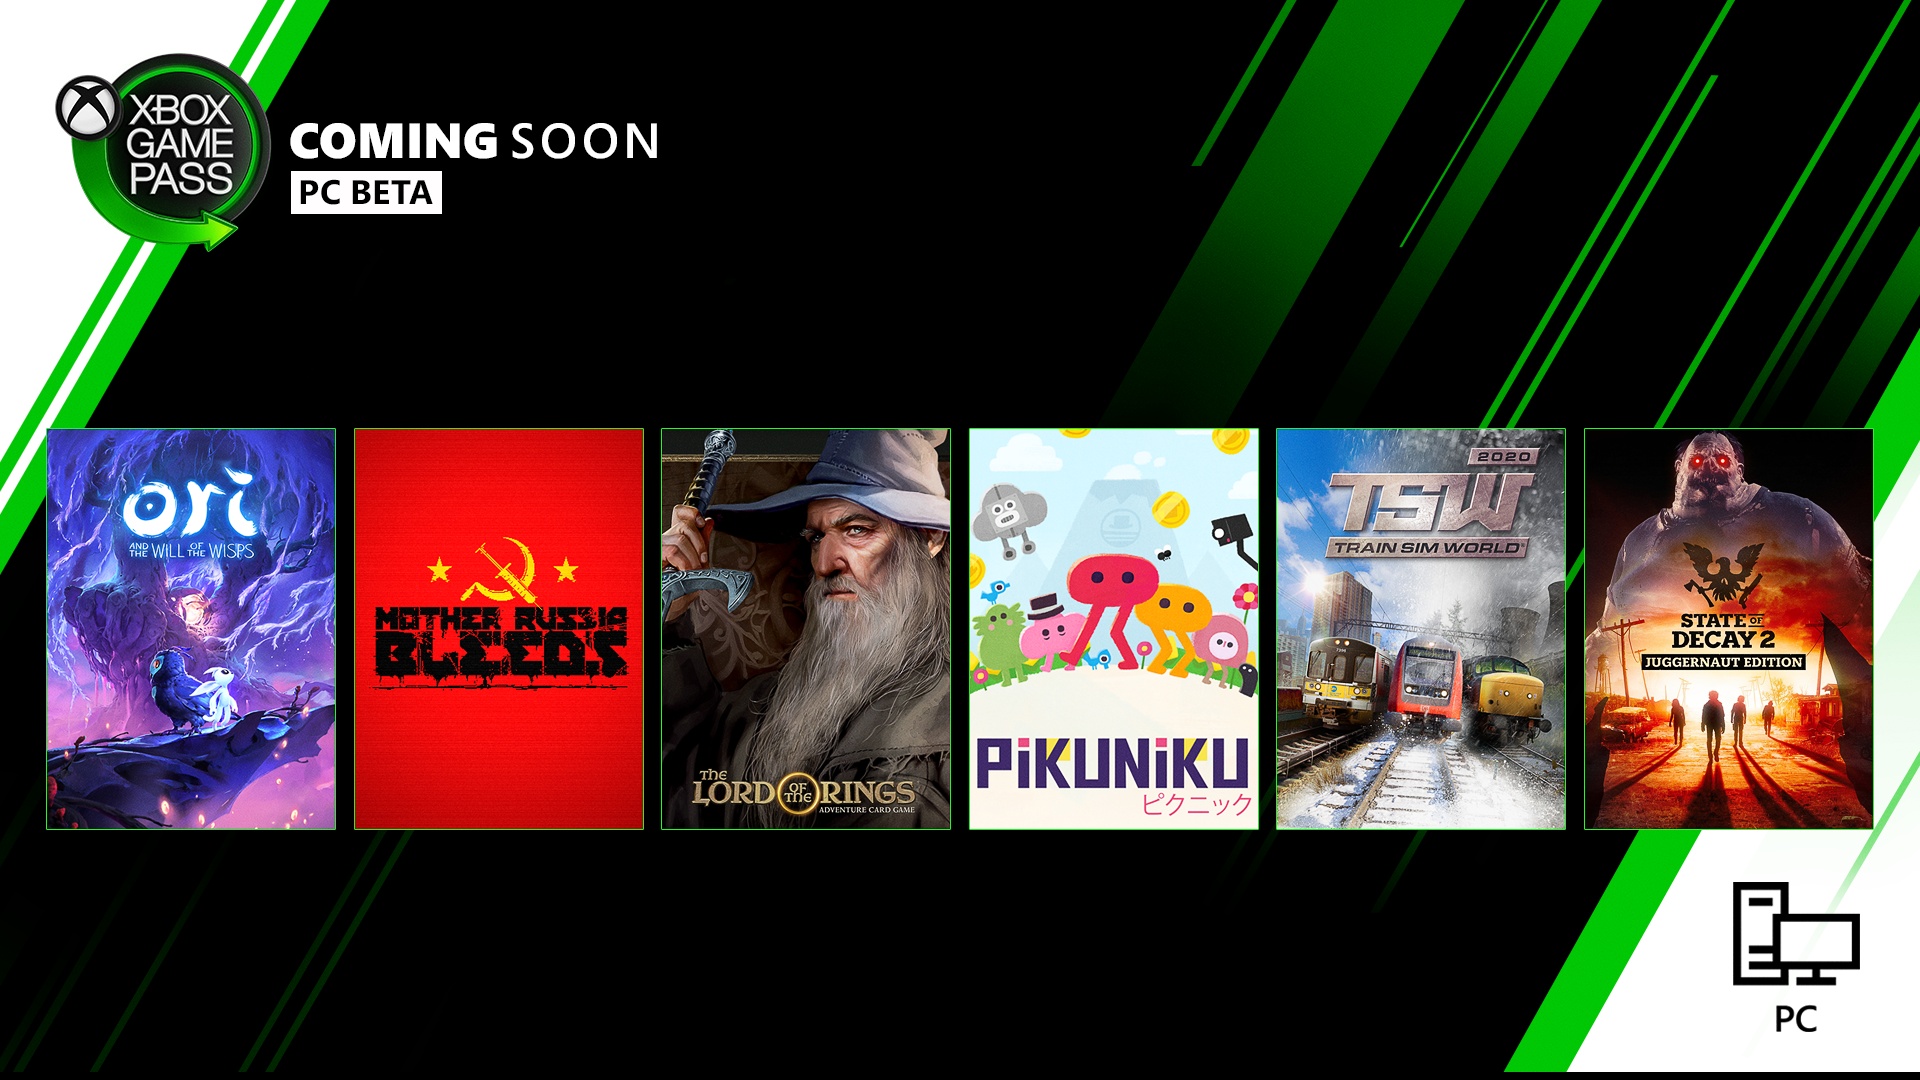 Xbox Game Pass - Coming Soon - March 2020